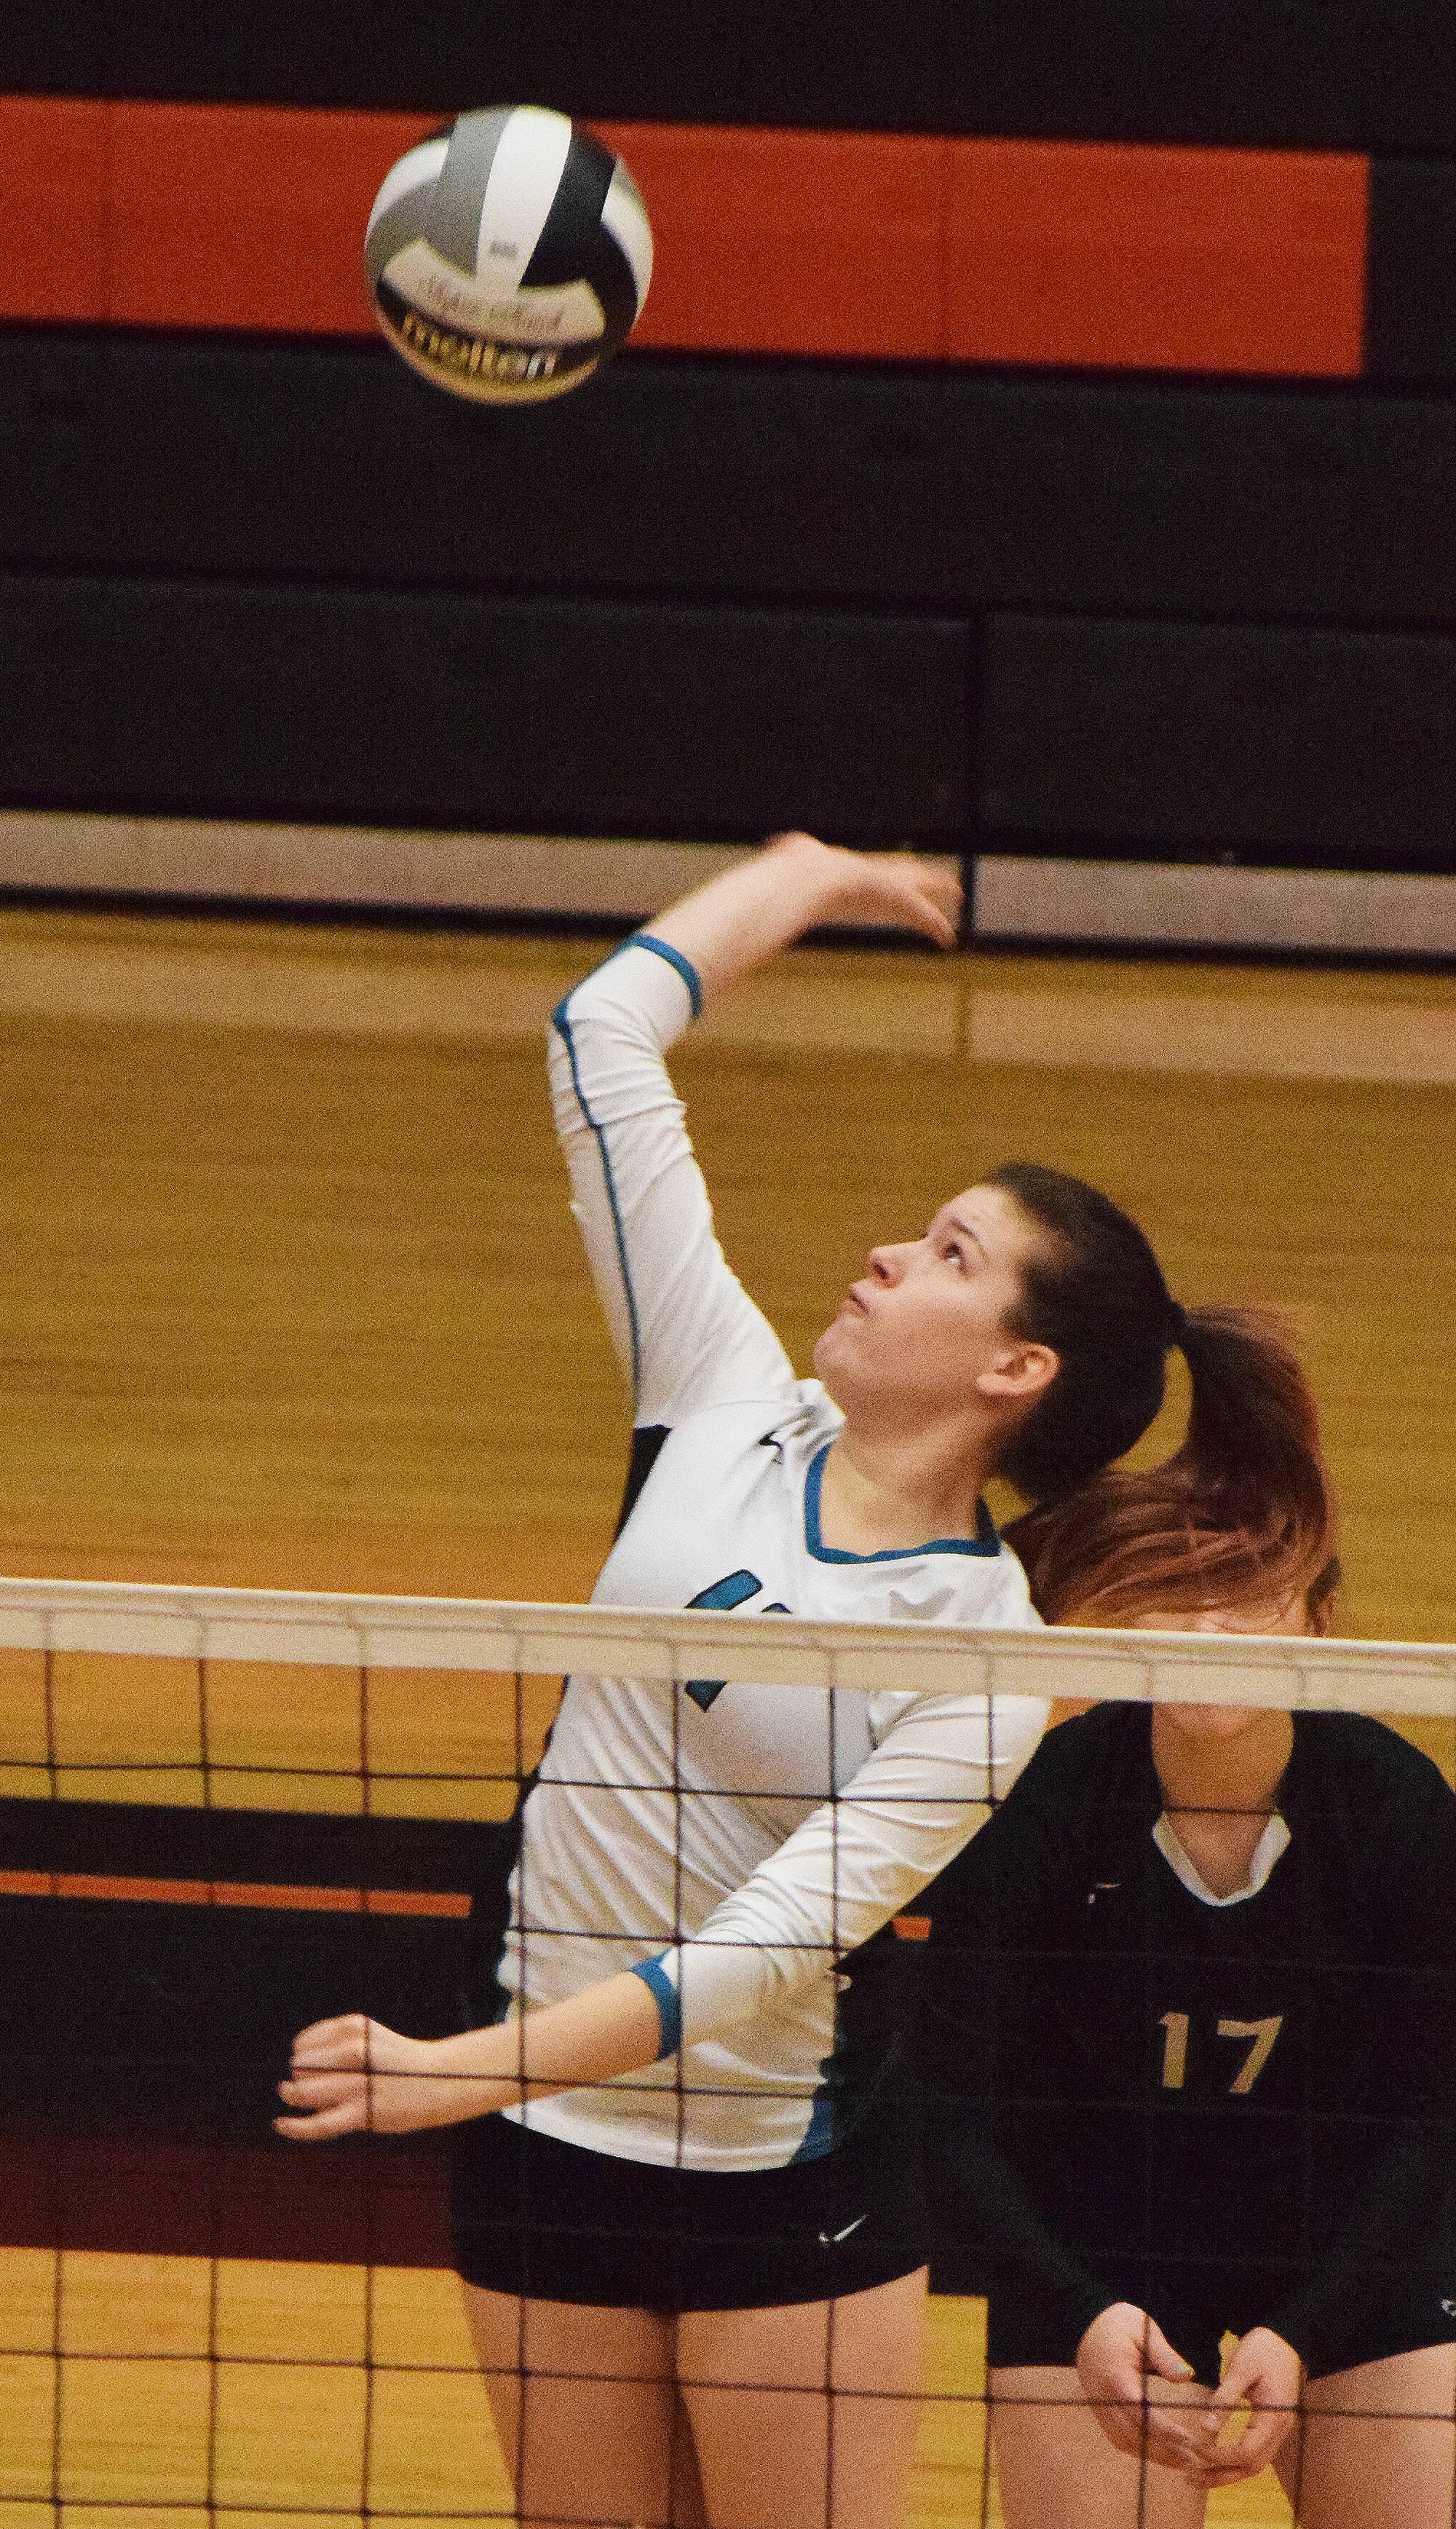 Nikiski senior Emilee Tiner winds up for a shot against Barrow Friday at the Class 3A state volleyball tournament at West High School. (Photo by Joey Klecka/Peninsula Clarion)